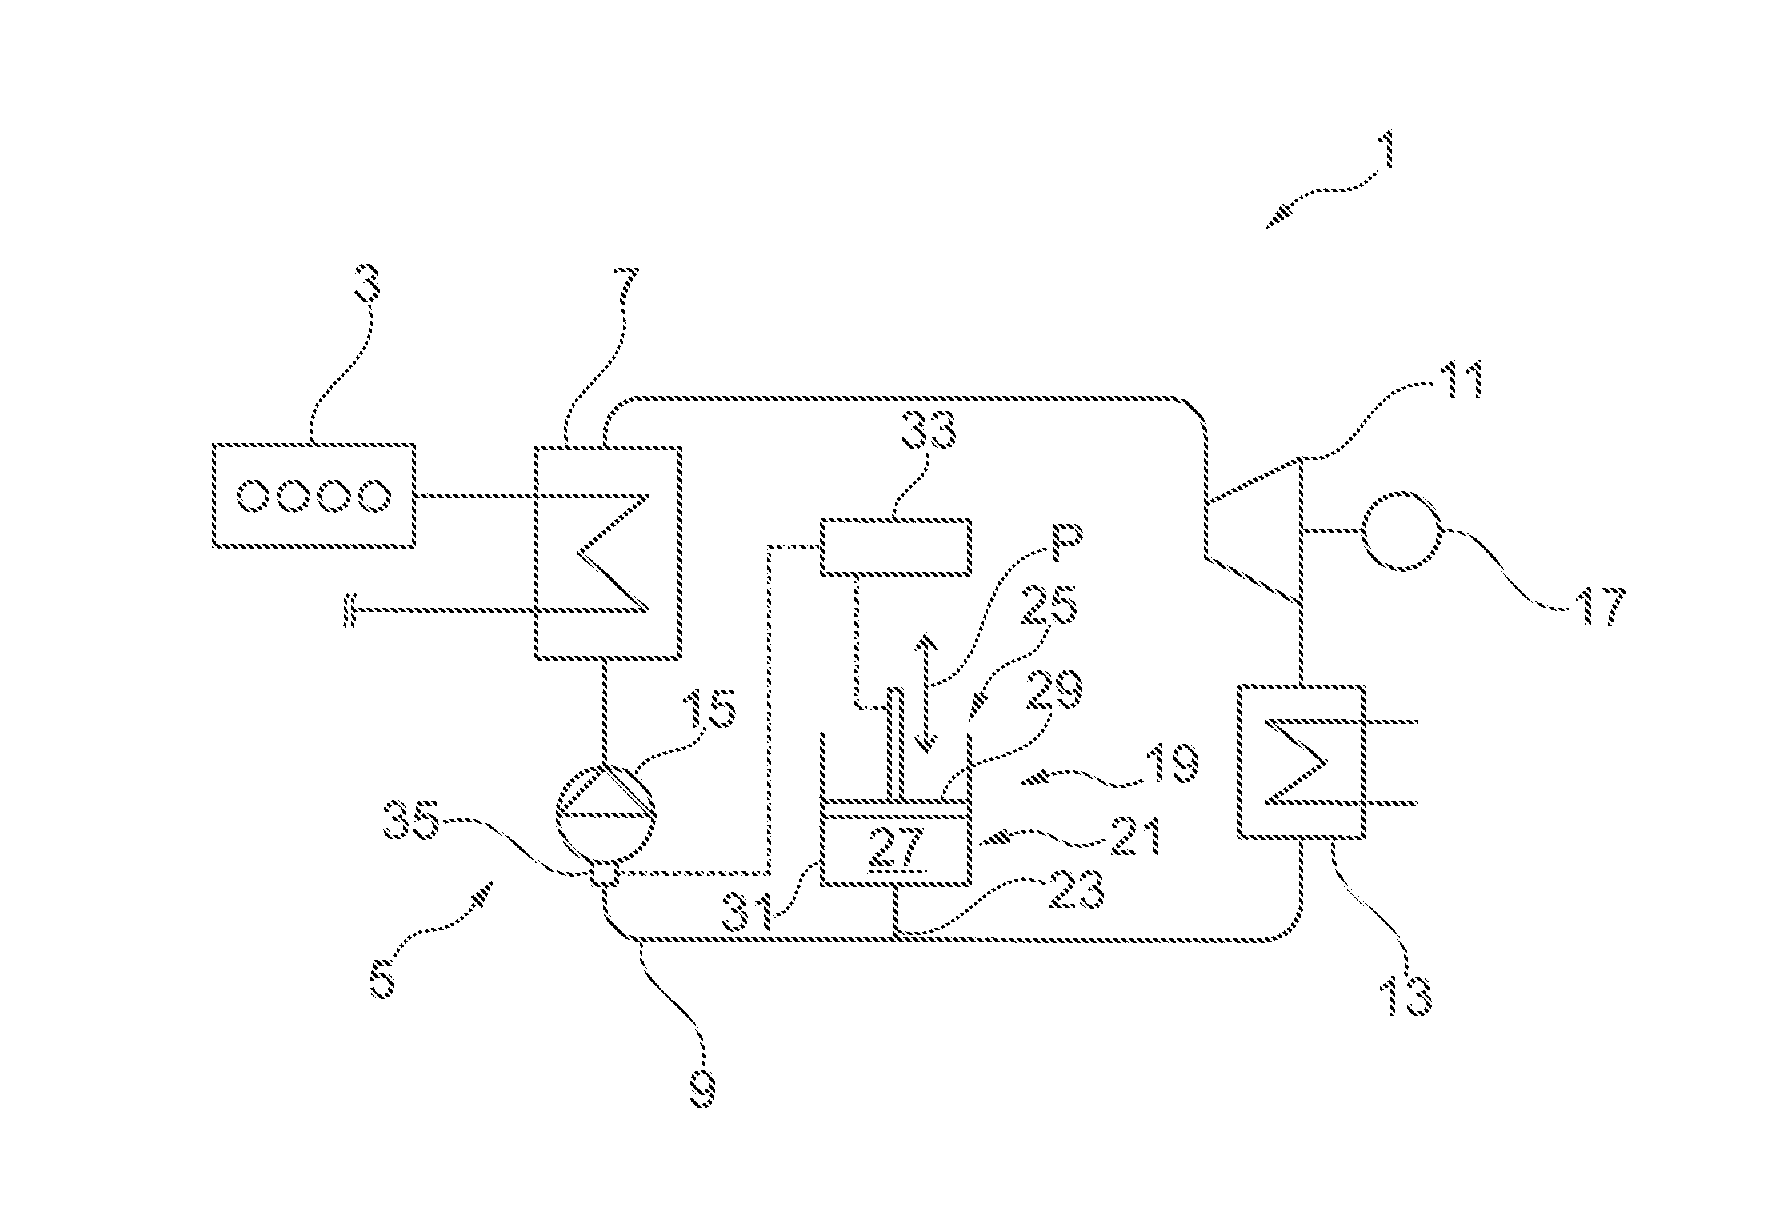 System for a thermodynamic cycle, control unit for a system for a thermodynamic cycle, method for operating a system, and arrangement with an internal combustion engine and a system